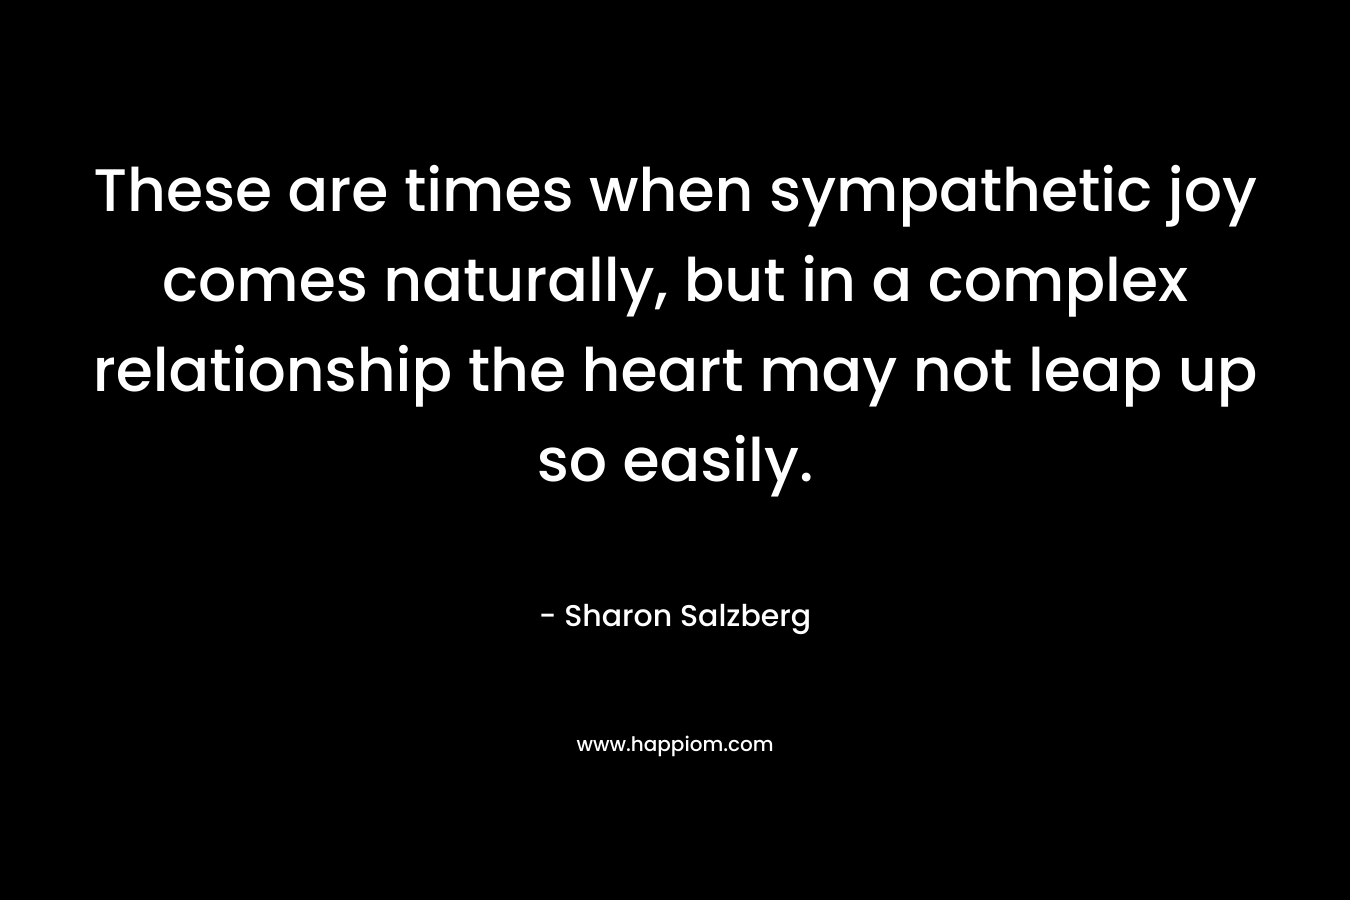 These are times when sympathetic joy comes naturally, but in a complex relationship the heart may not leap up so easily.